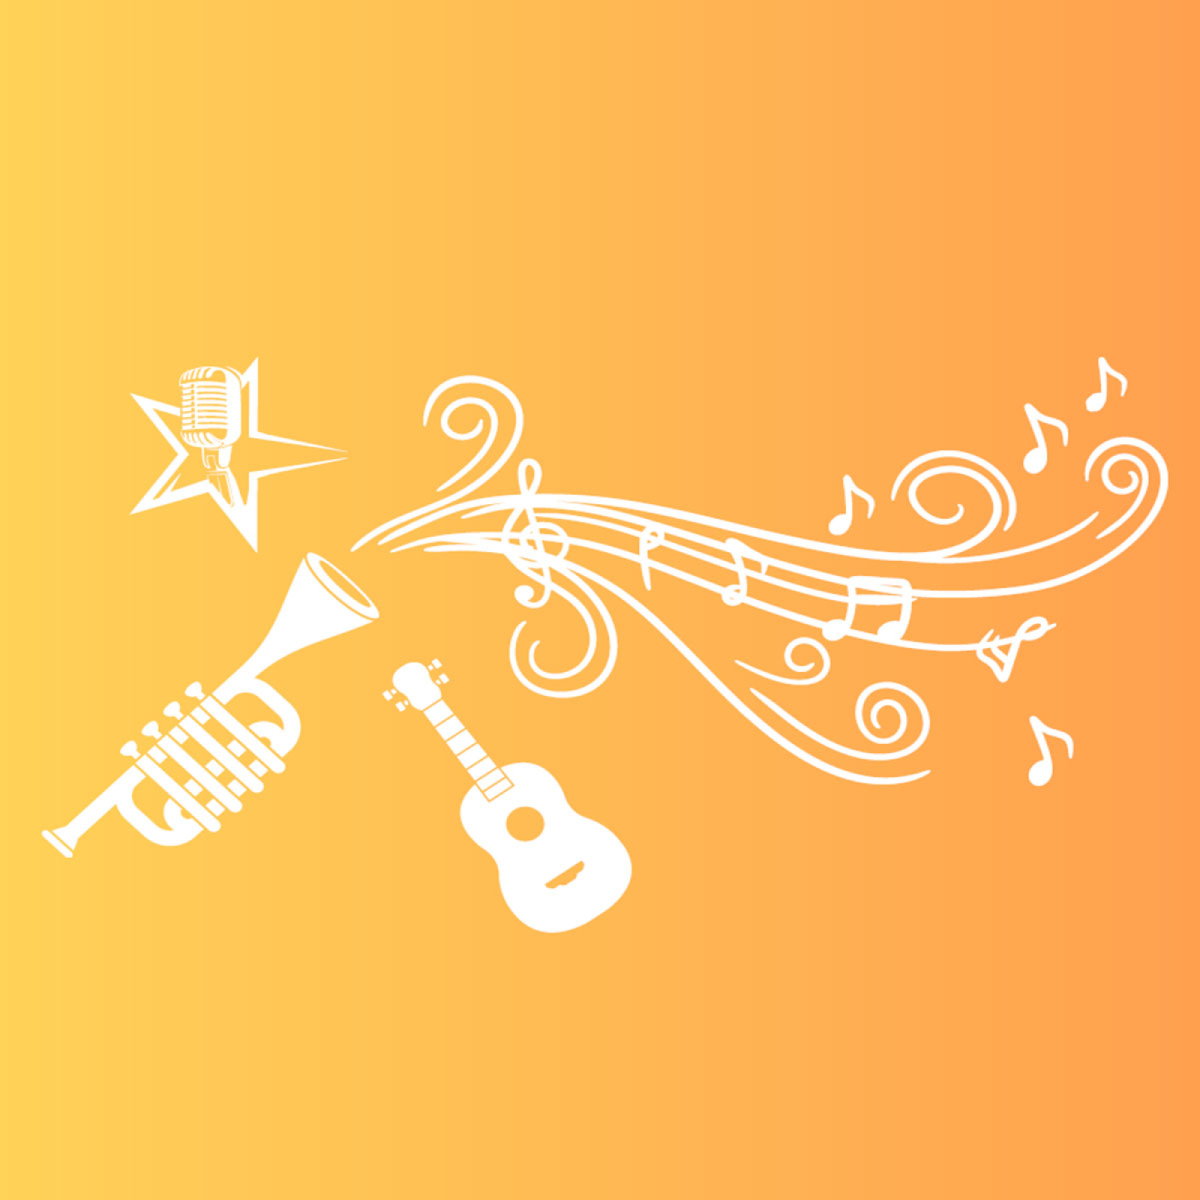 vectors of music instruments and notes